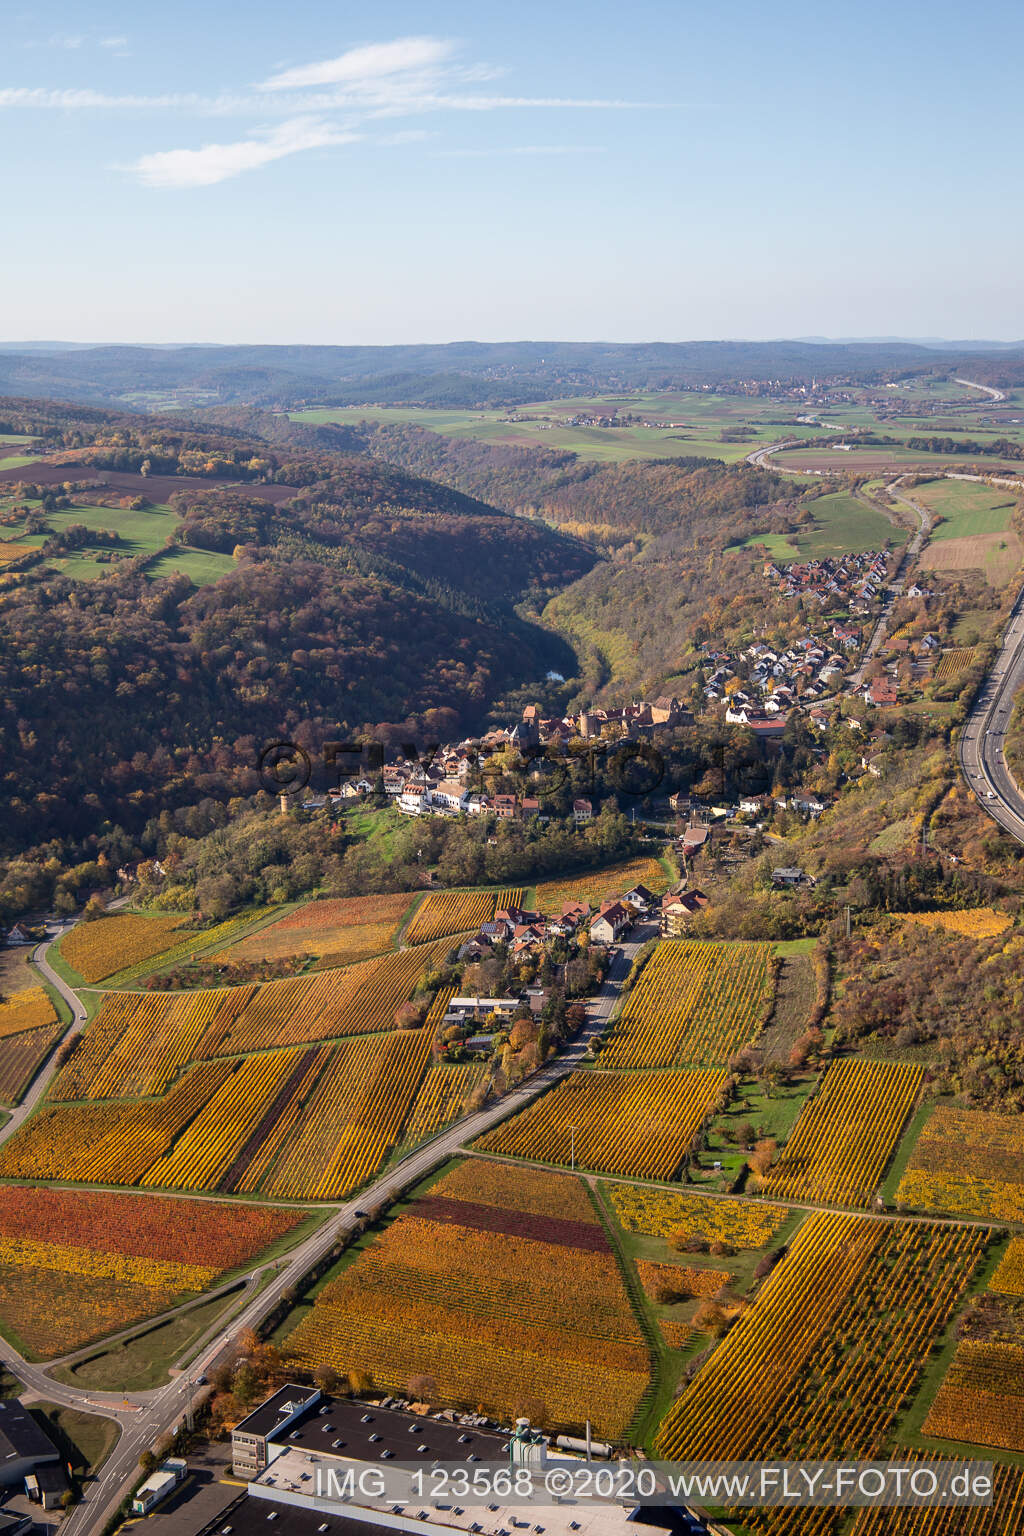 Neuleiningen in the state Rhineland-Palatinate, Germany seen from above